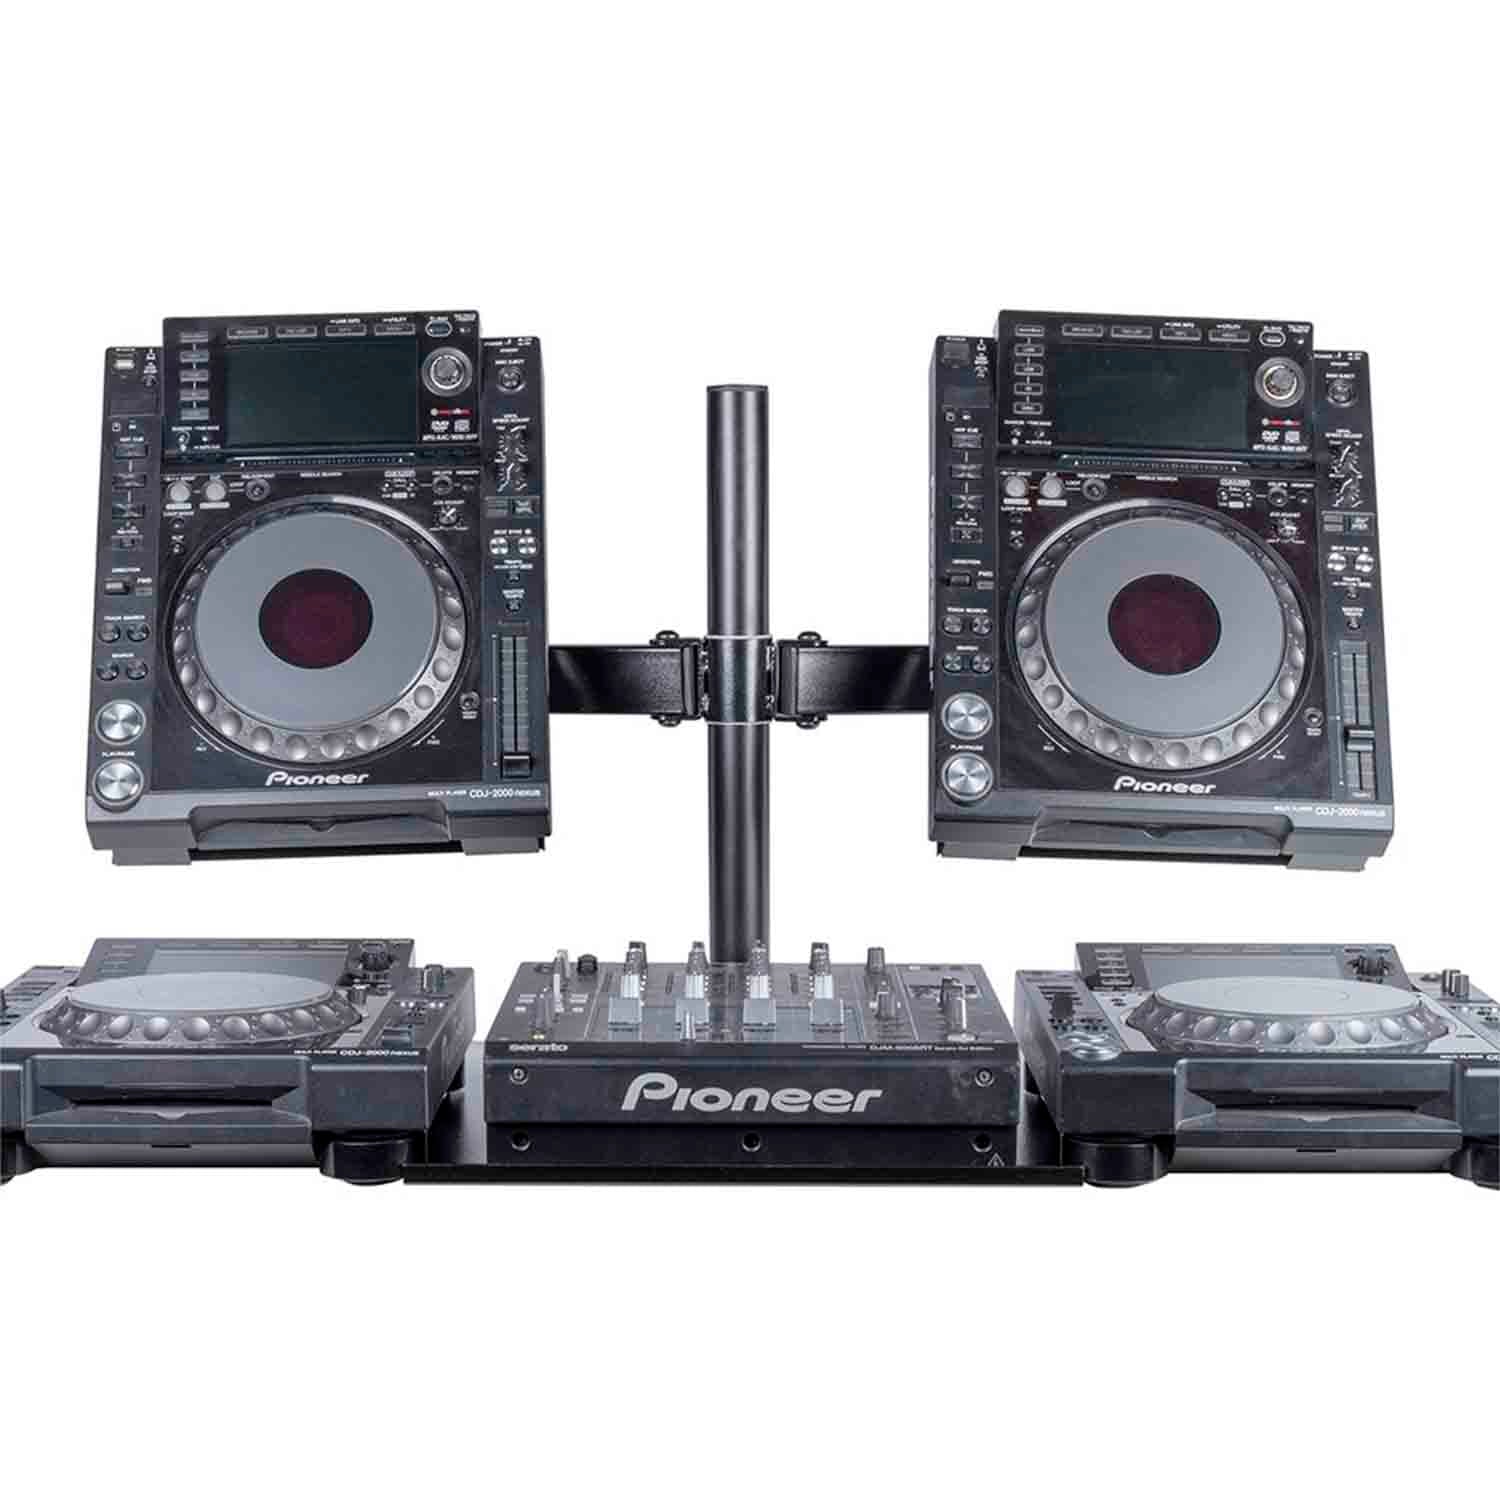 B-Stock: Headliner HL22000 Avalon CDJ Stand With Independently Adjustable Twin Arms - Hollywood DJ